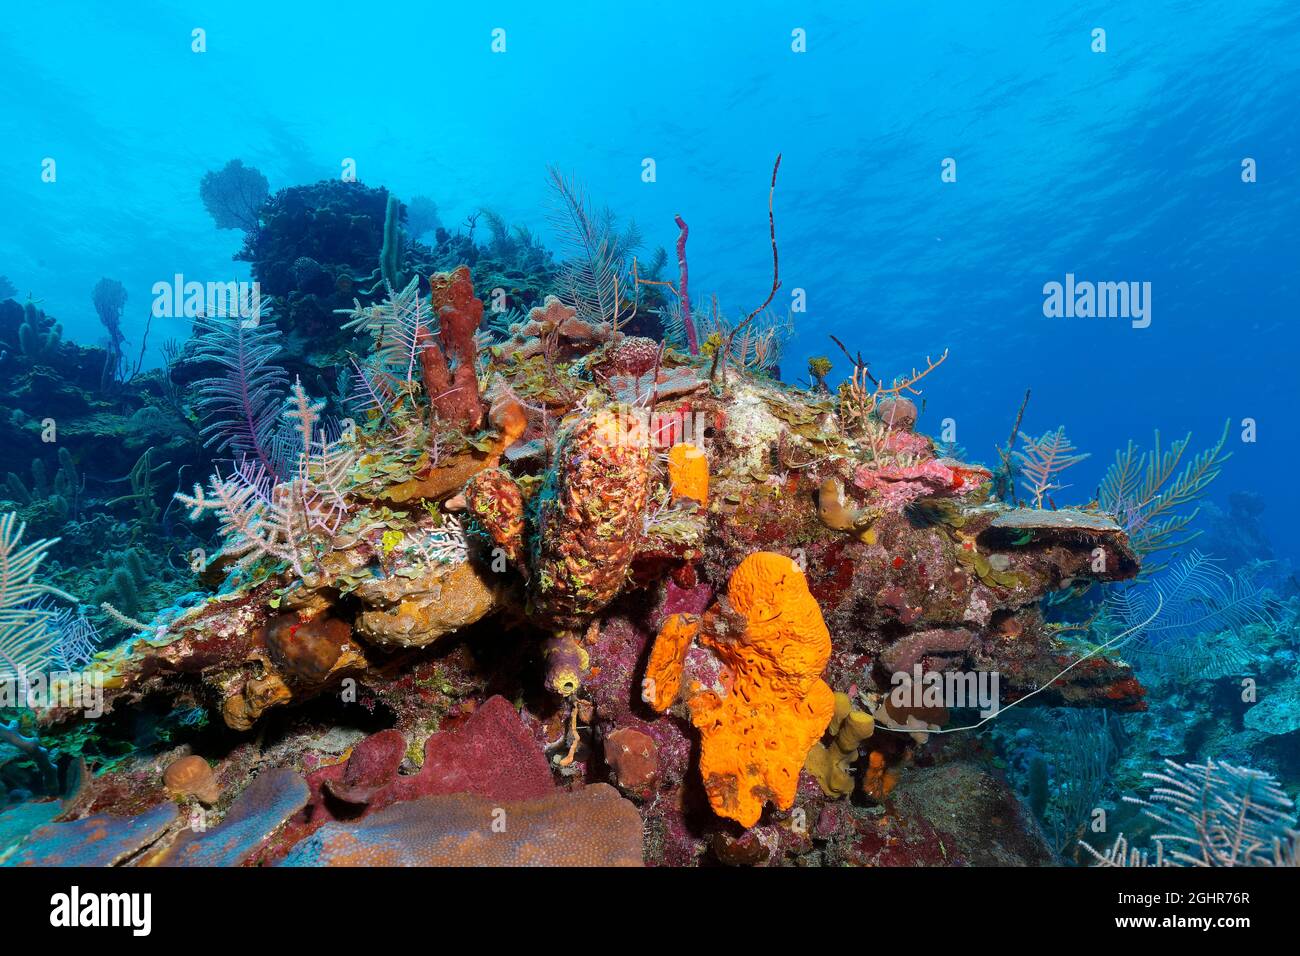 Typical Caribbean coral reef with various sponges and corals, Caribbean Sea near Playa St. Lucia, Camagueey Province, Caribbean, Cuba Stock Photo